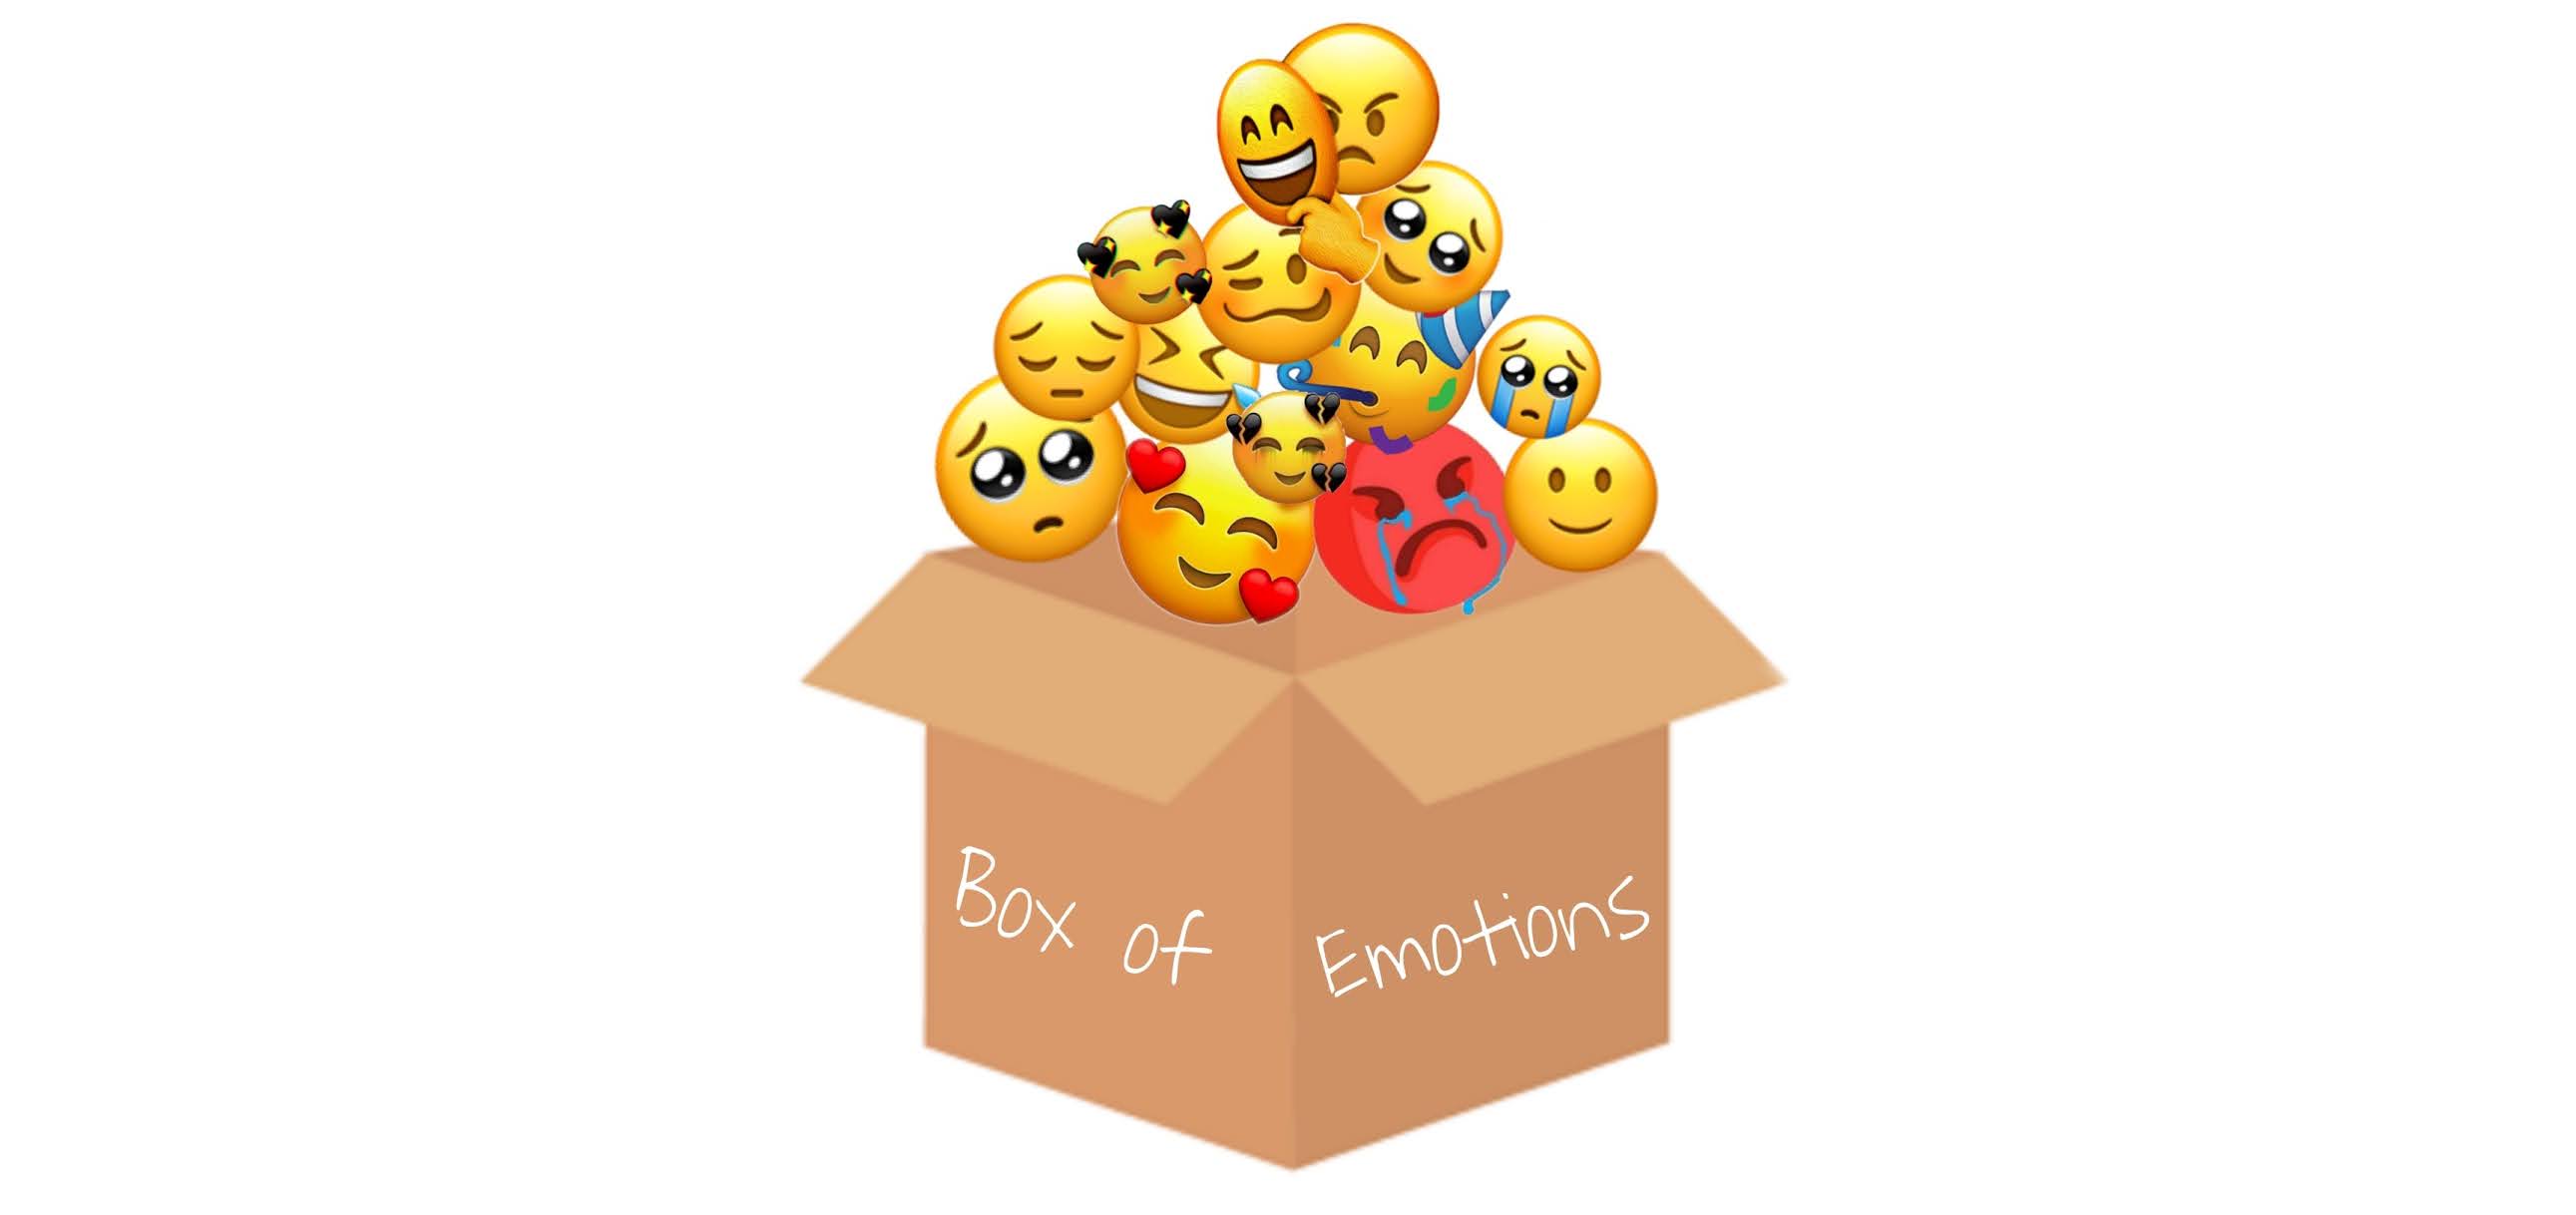 Box of emotions. How to manage emotions.